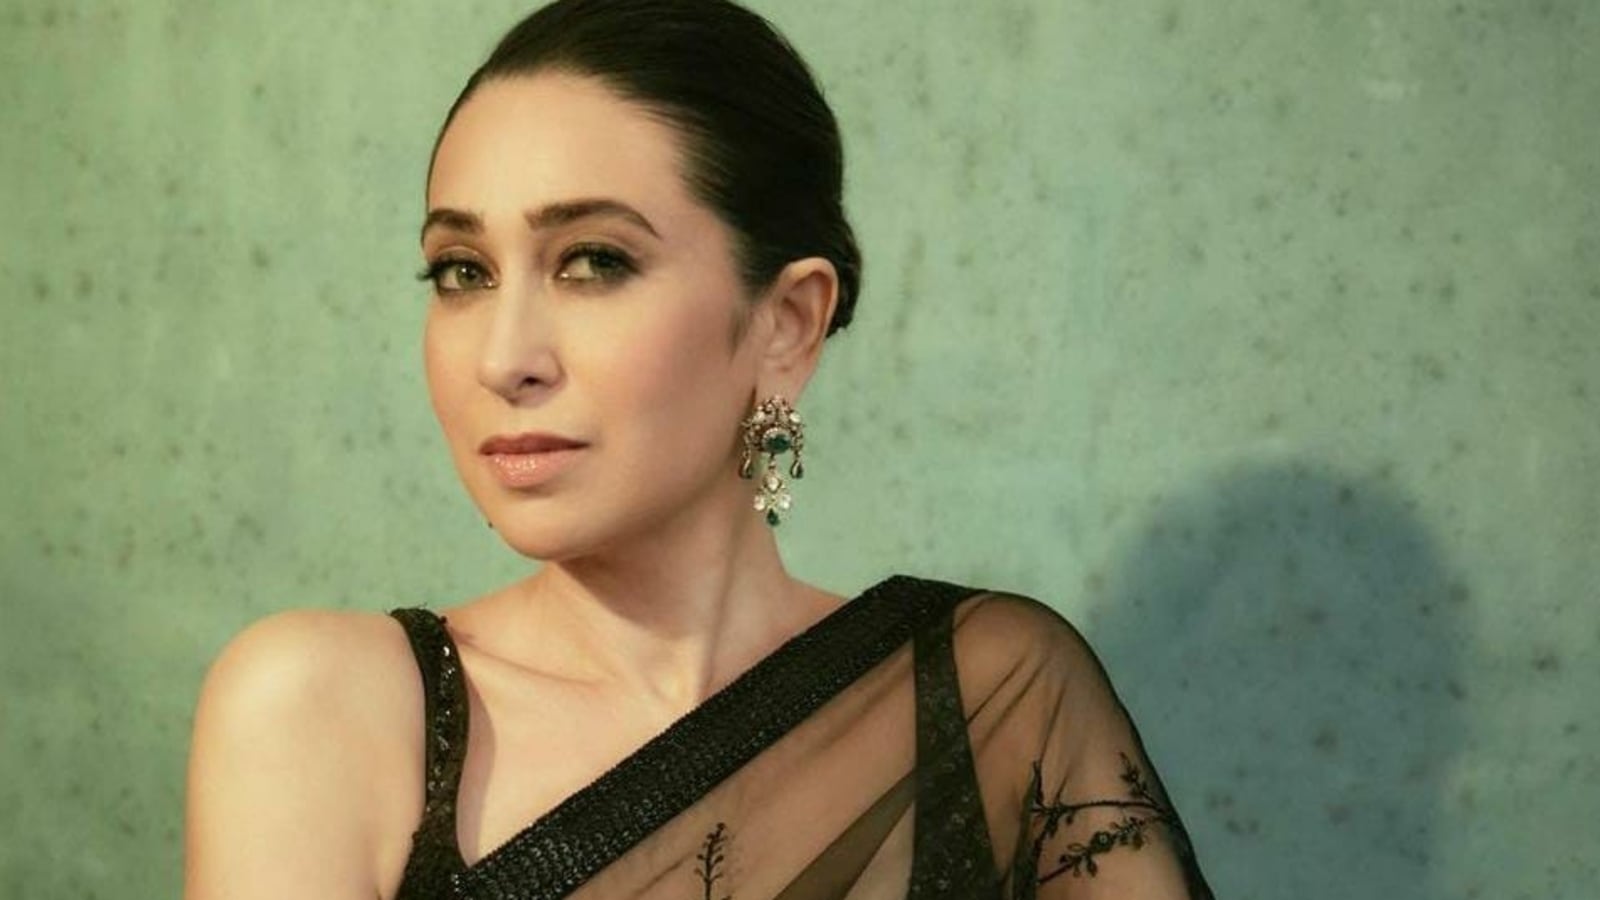 Karishma Ki Xxx - Karisma Kapoor responds as fan asks her if she would ever get married again  | Bollywood - Hindustan Times